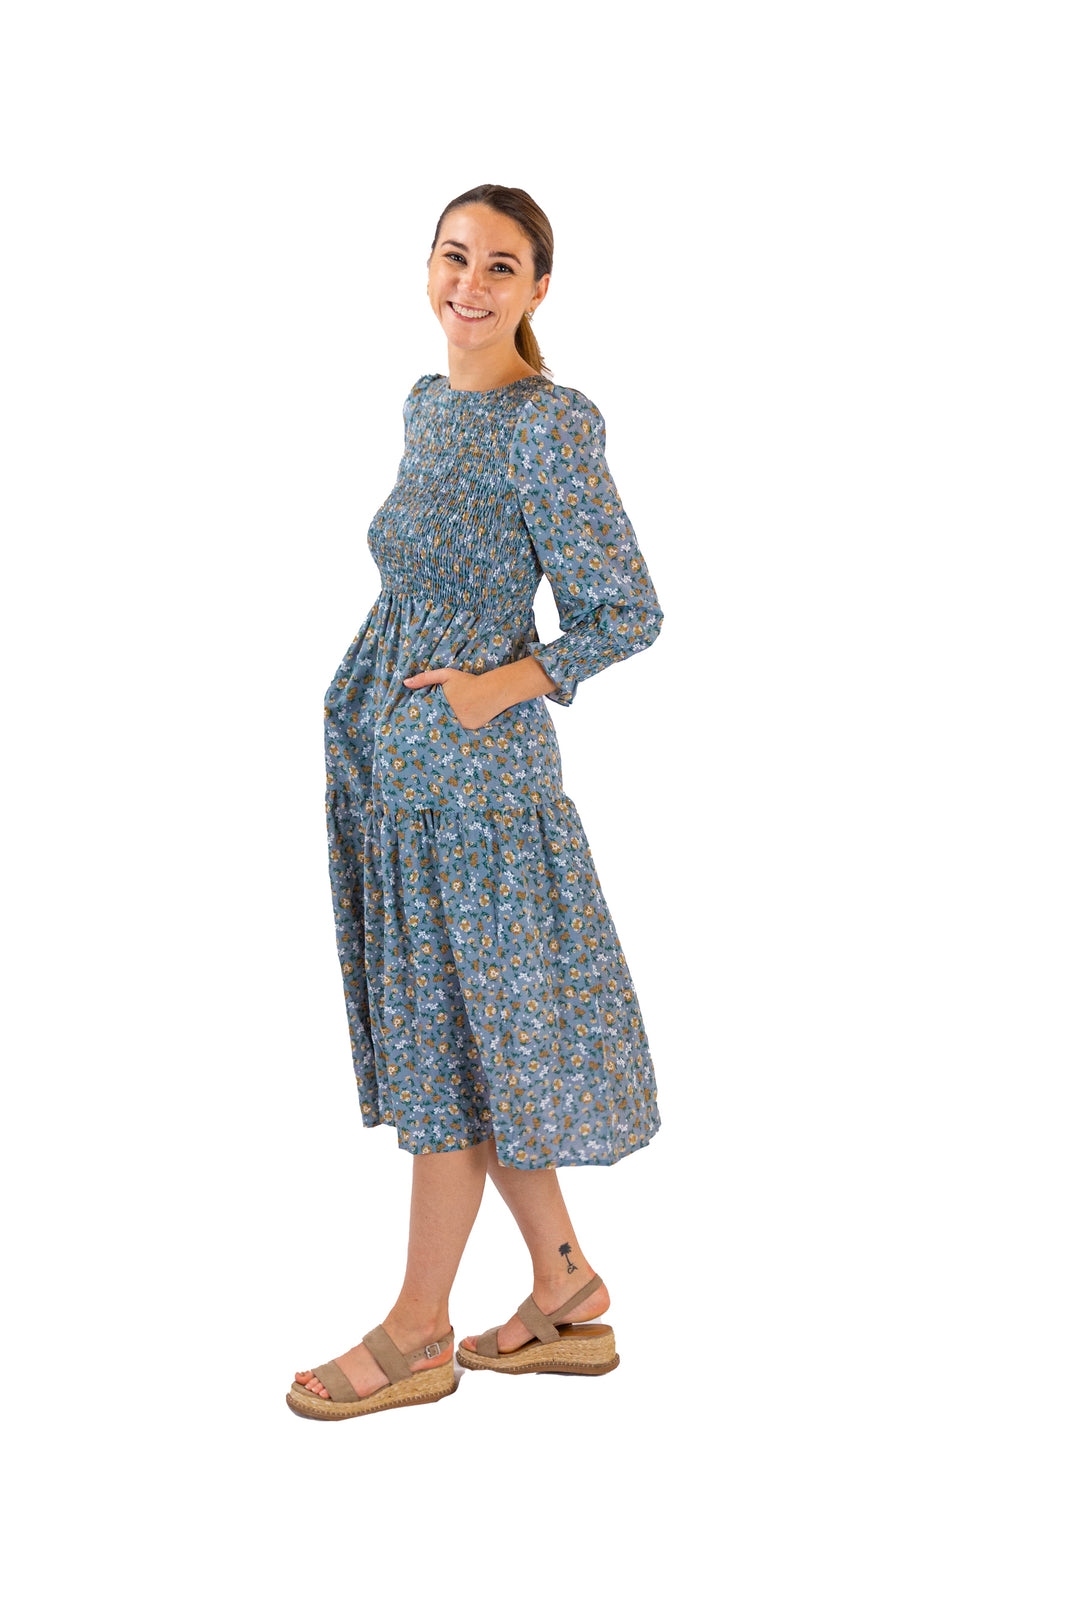 Enchanted Garden Blue Floral Midi Dress with Three-Quarter Sleeves